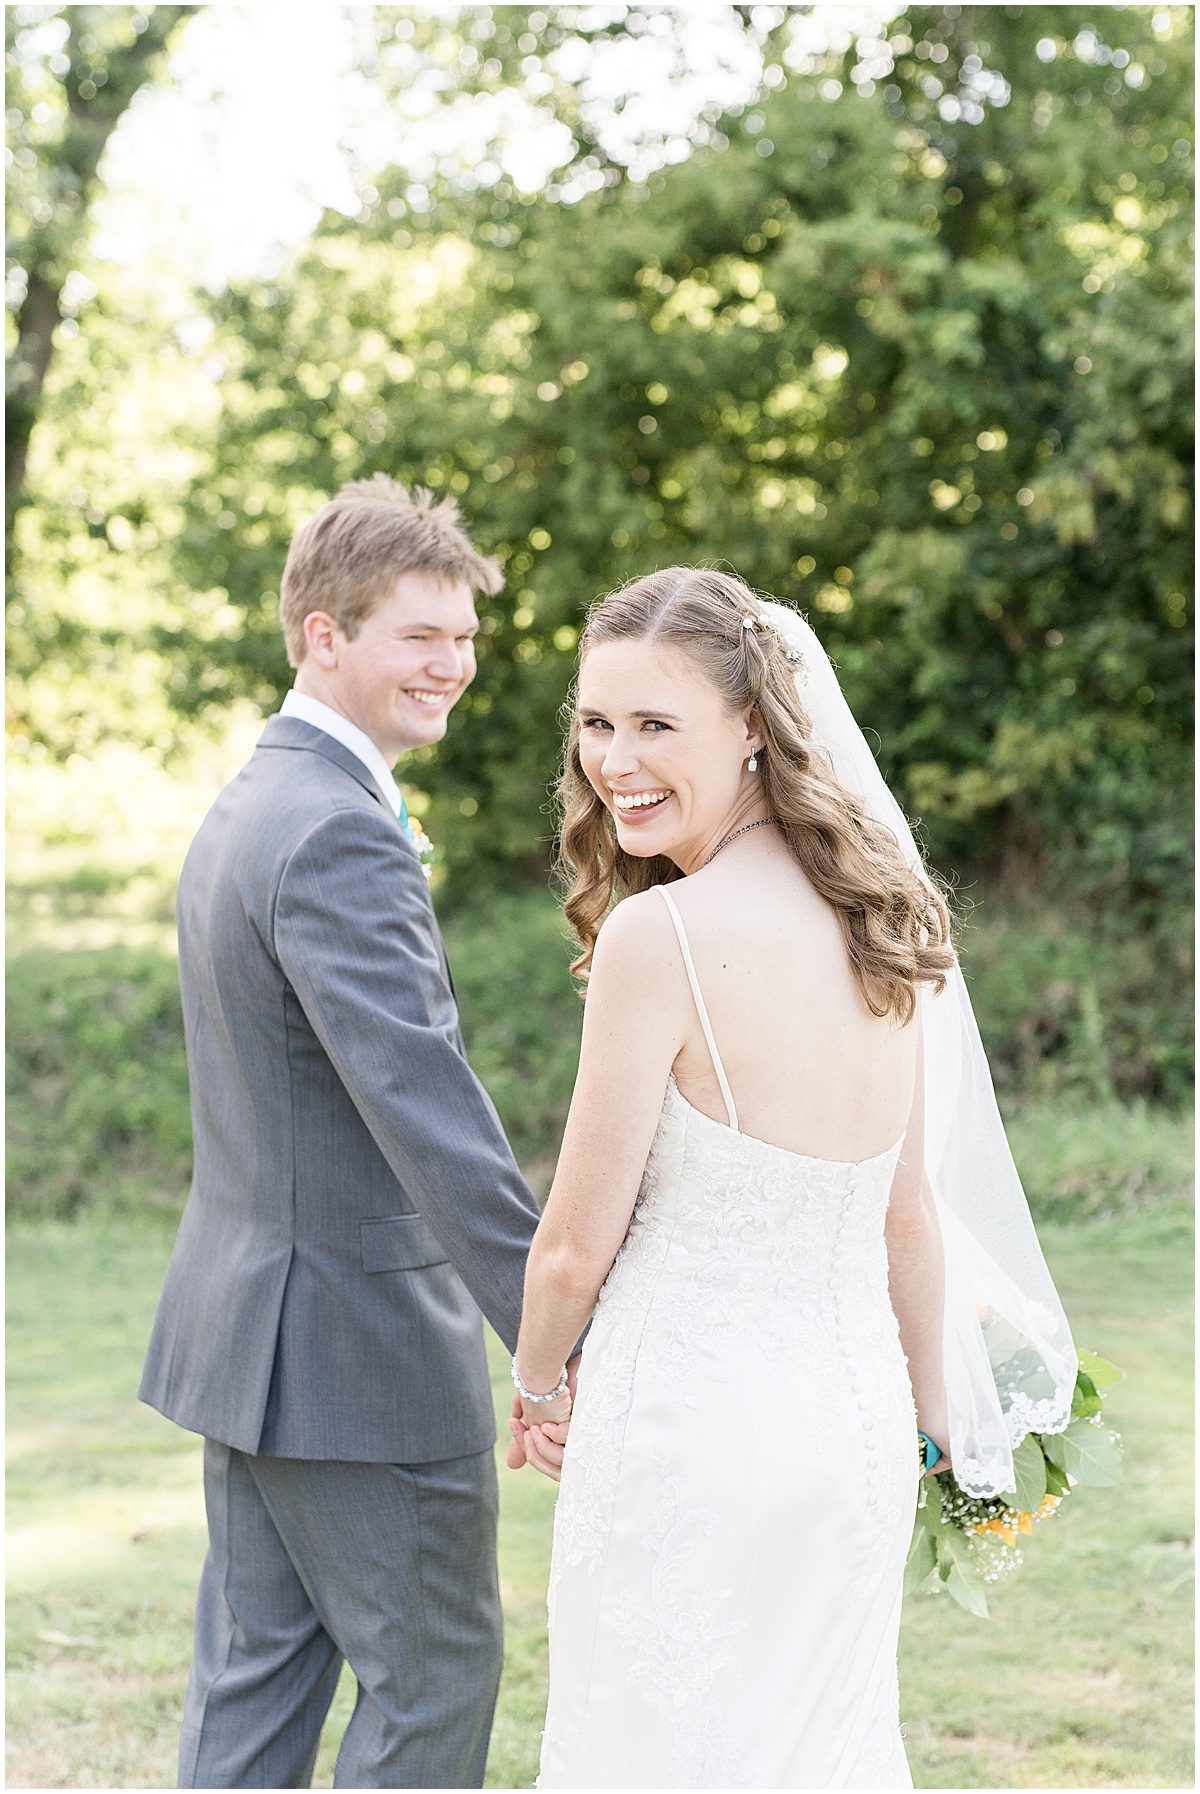 Bride and groom at River Glen Country Club wedding in Fishers, Indiana photographed by Victoria Rayburn Photography